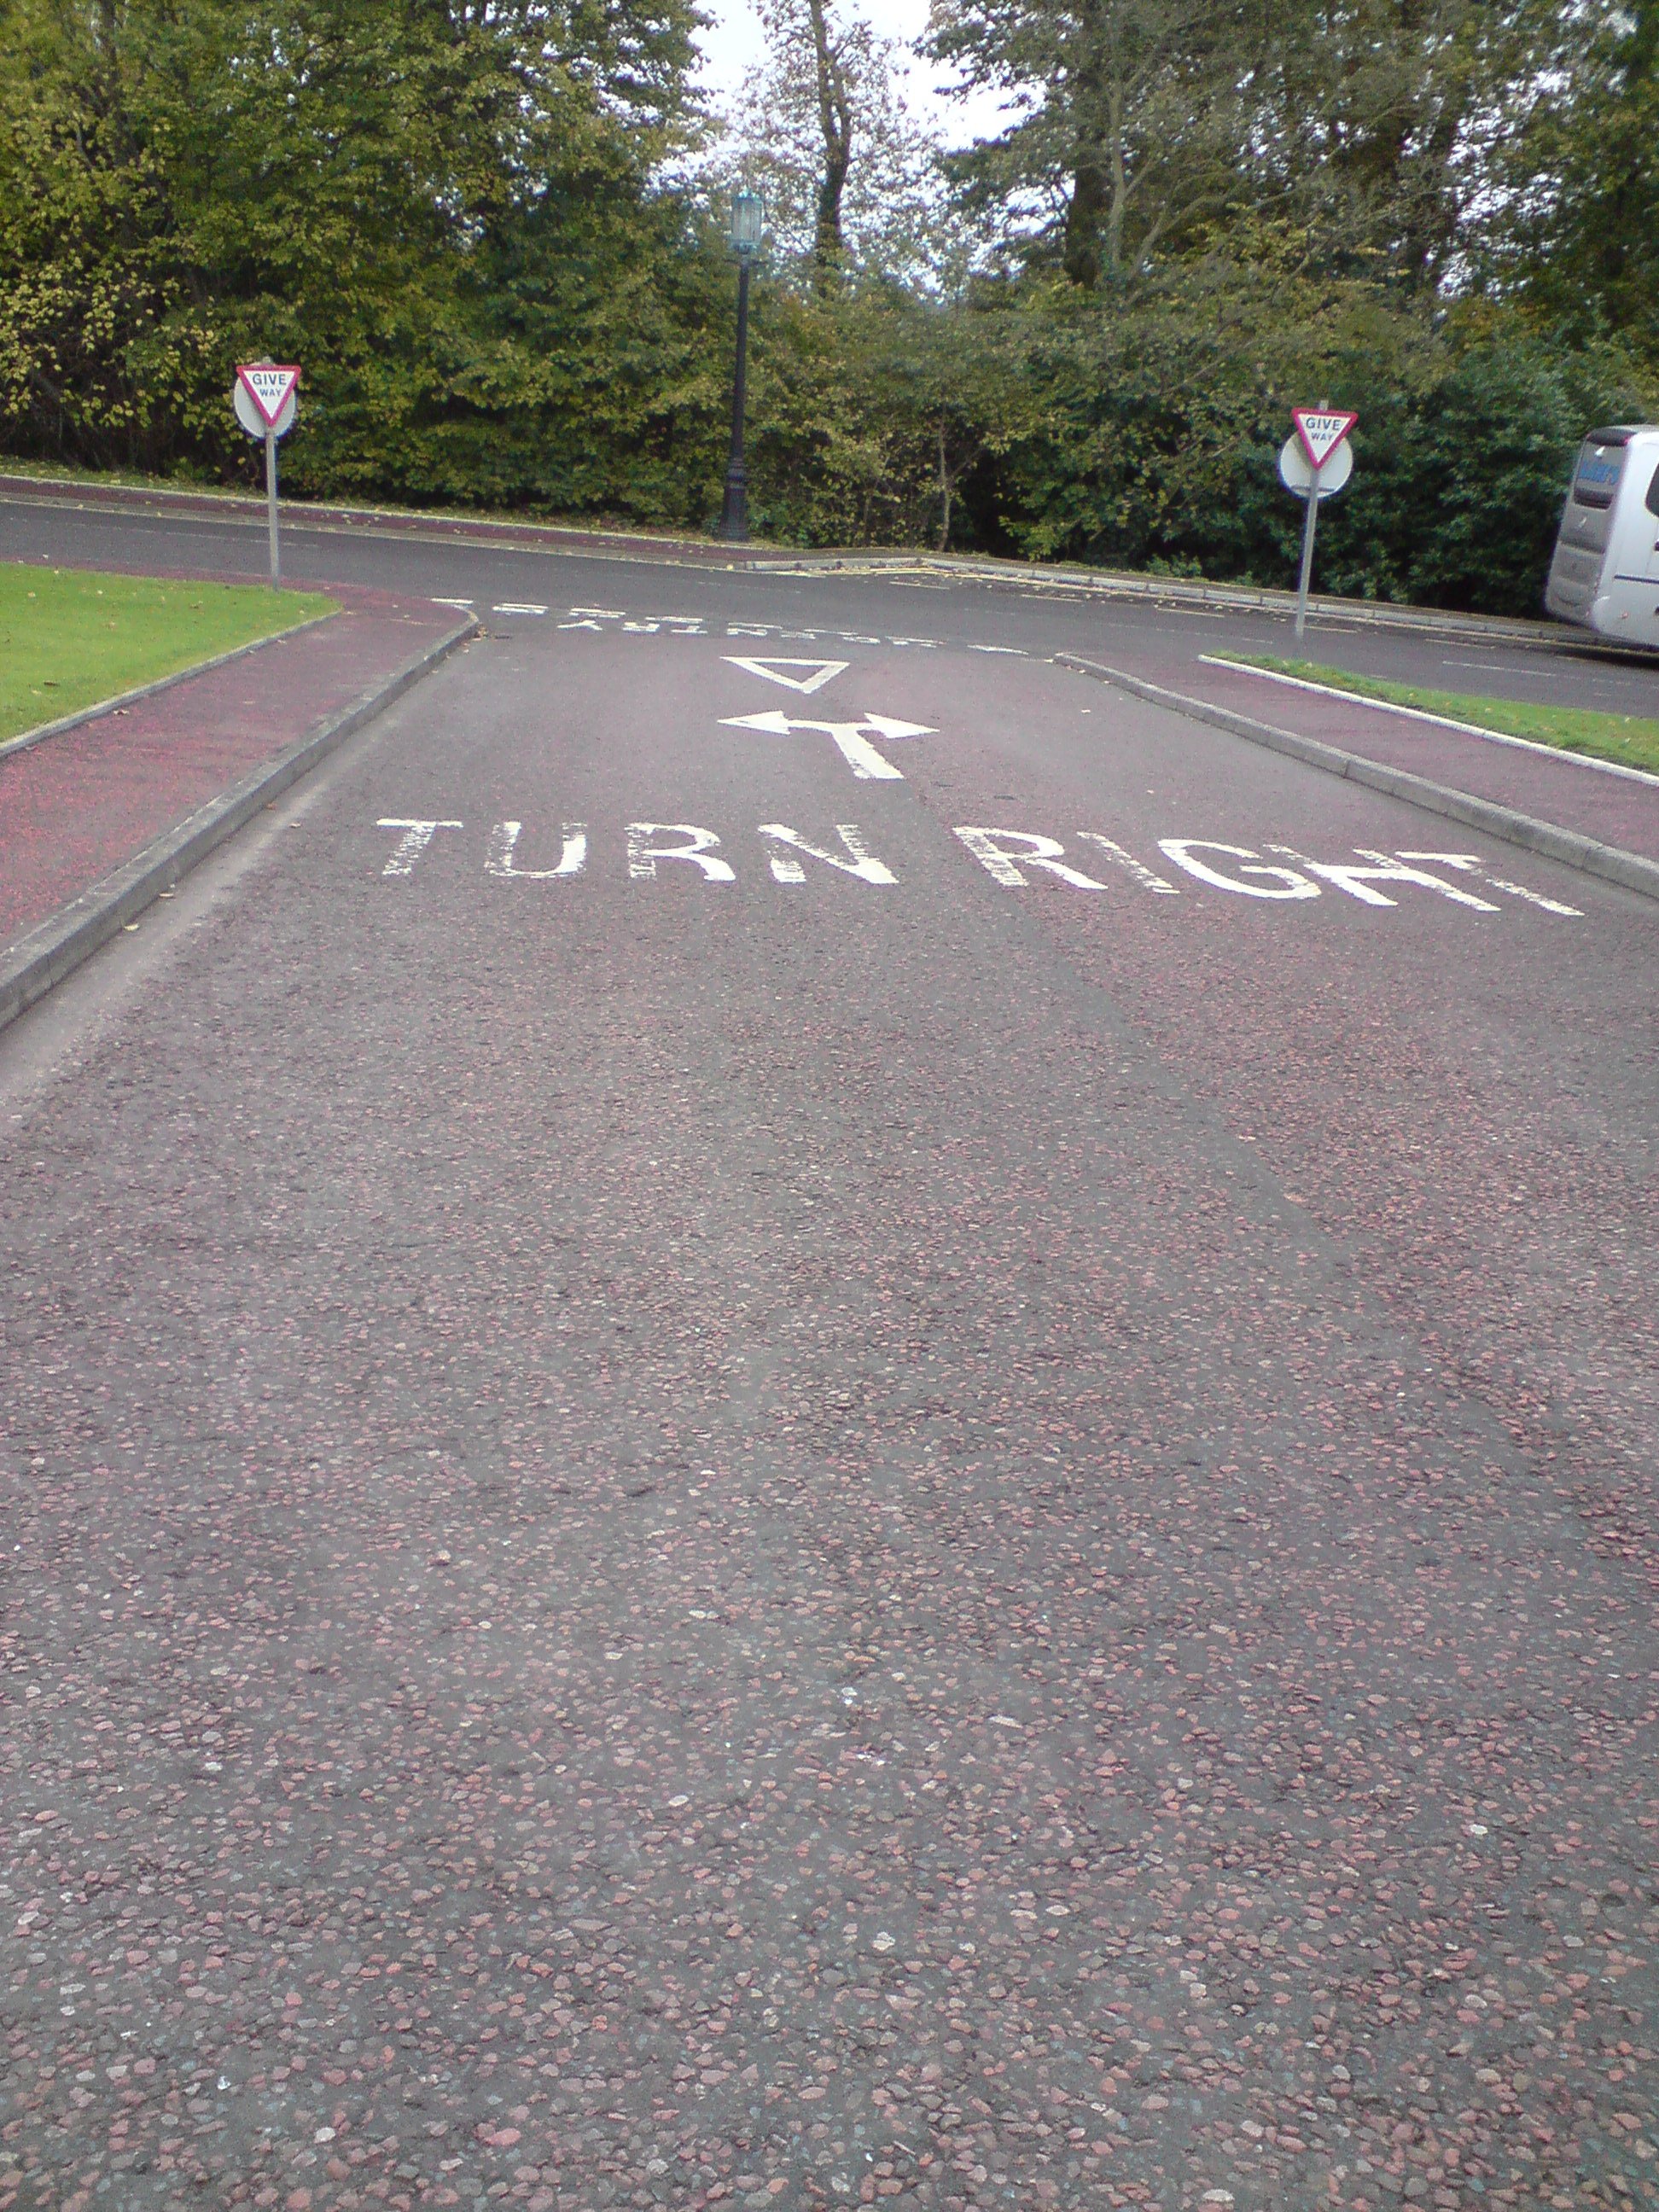 Stormont road sign (why NI politicians are confused sometimes)